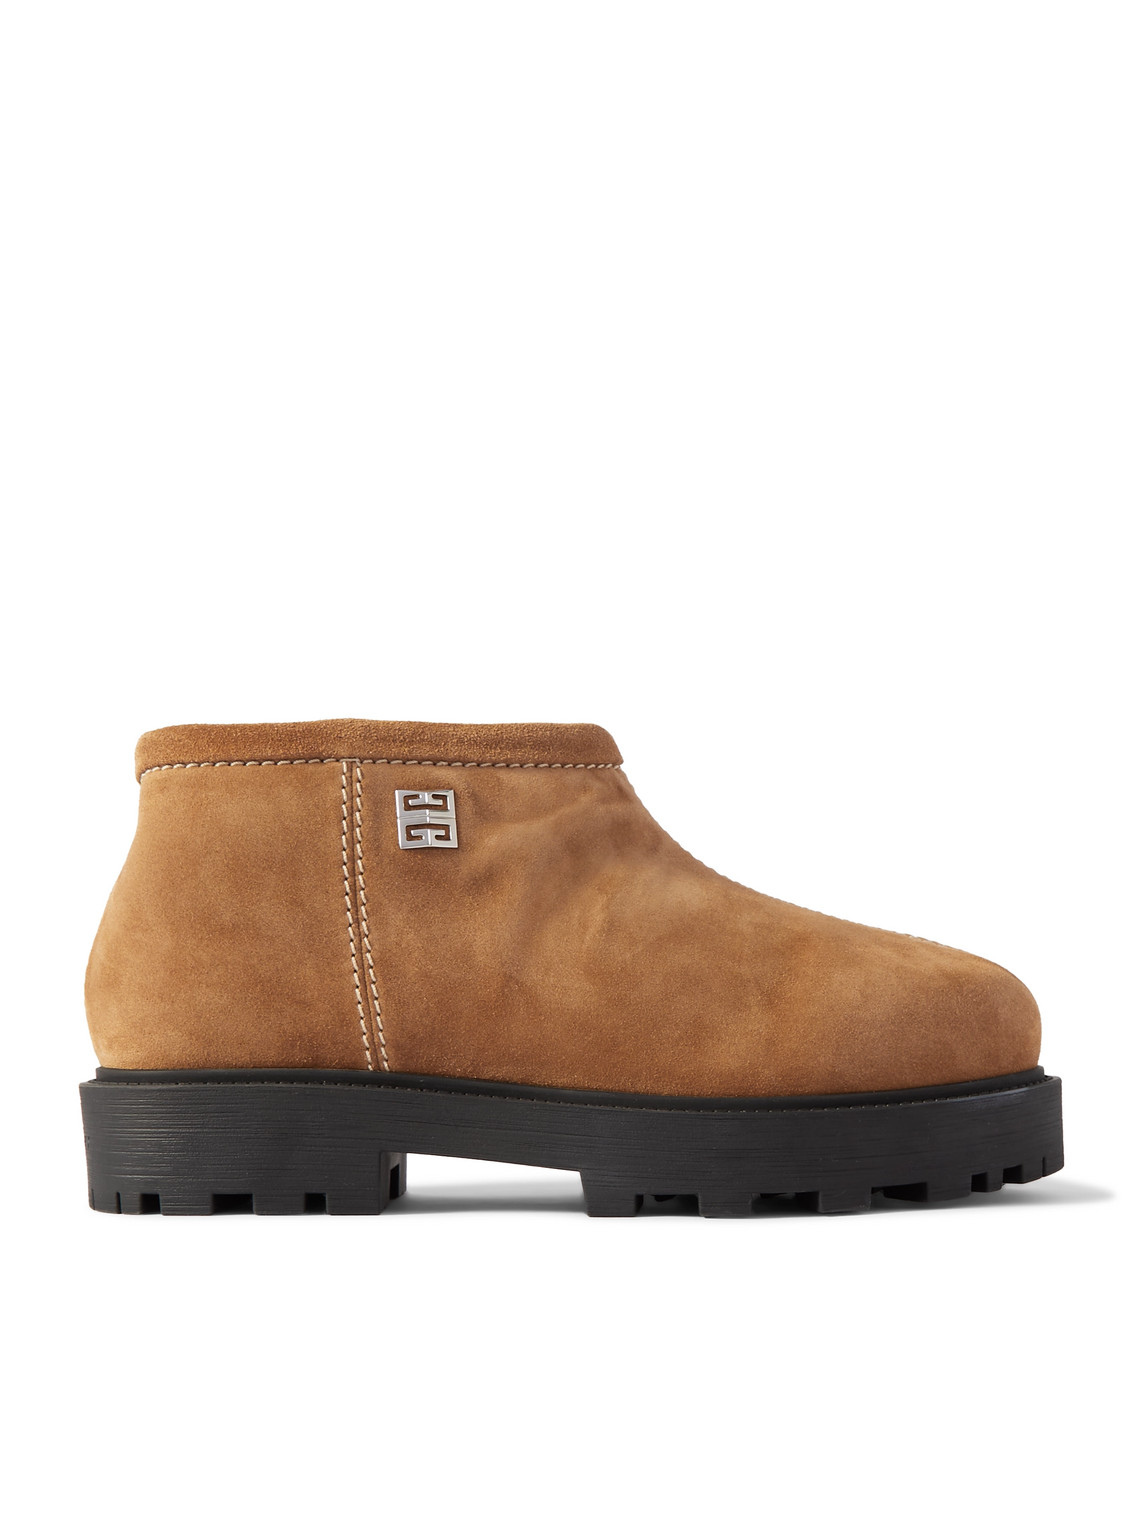 Shearling-Lined Logo-Embellished Suede Boots